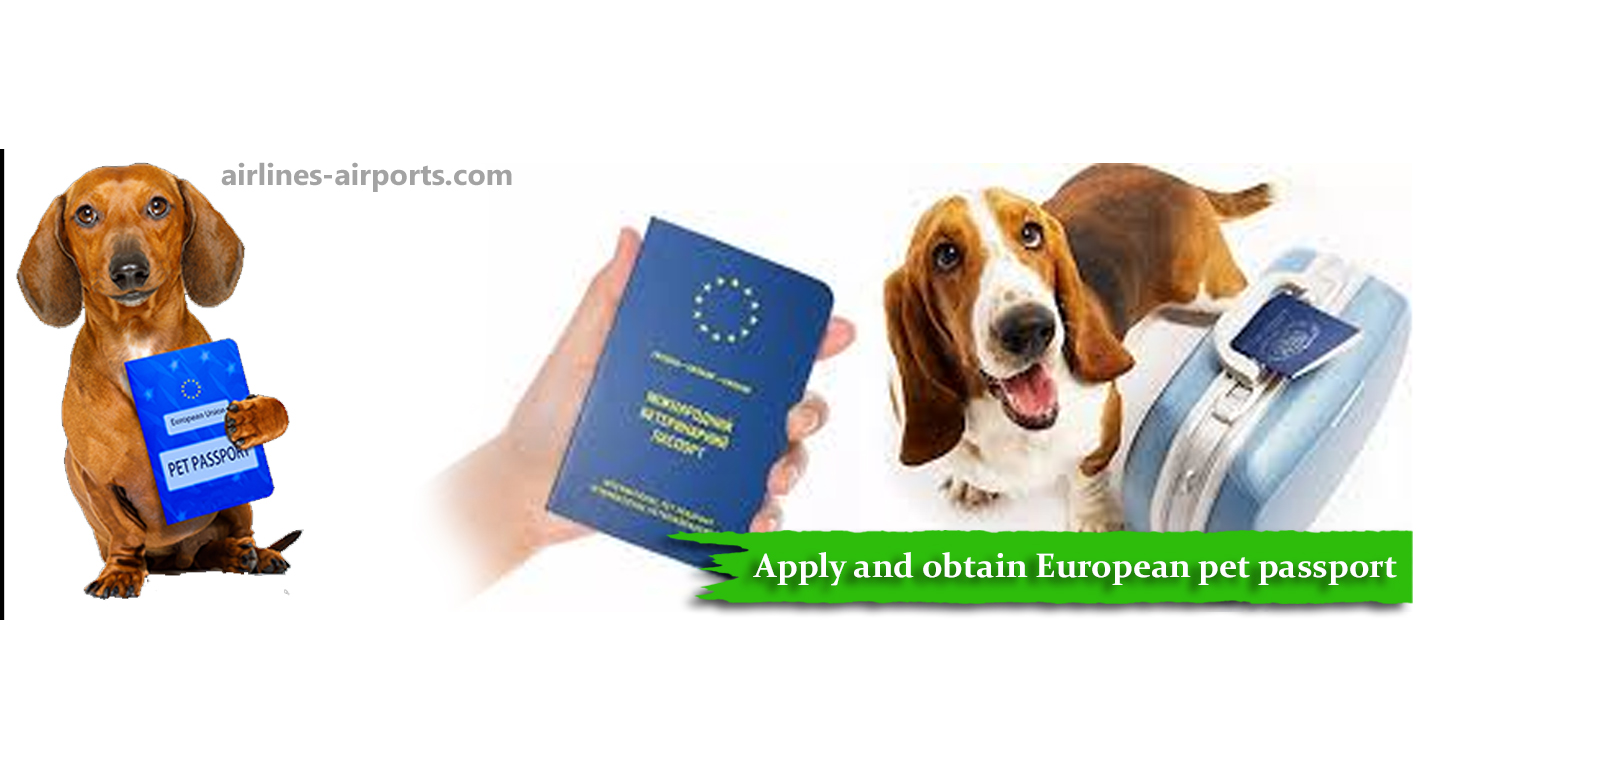 do i need a pet passport to take my dog to france